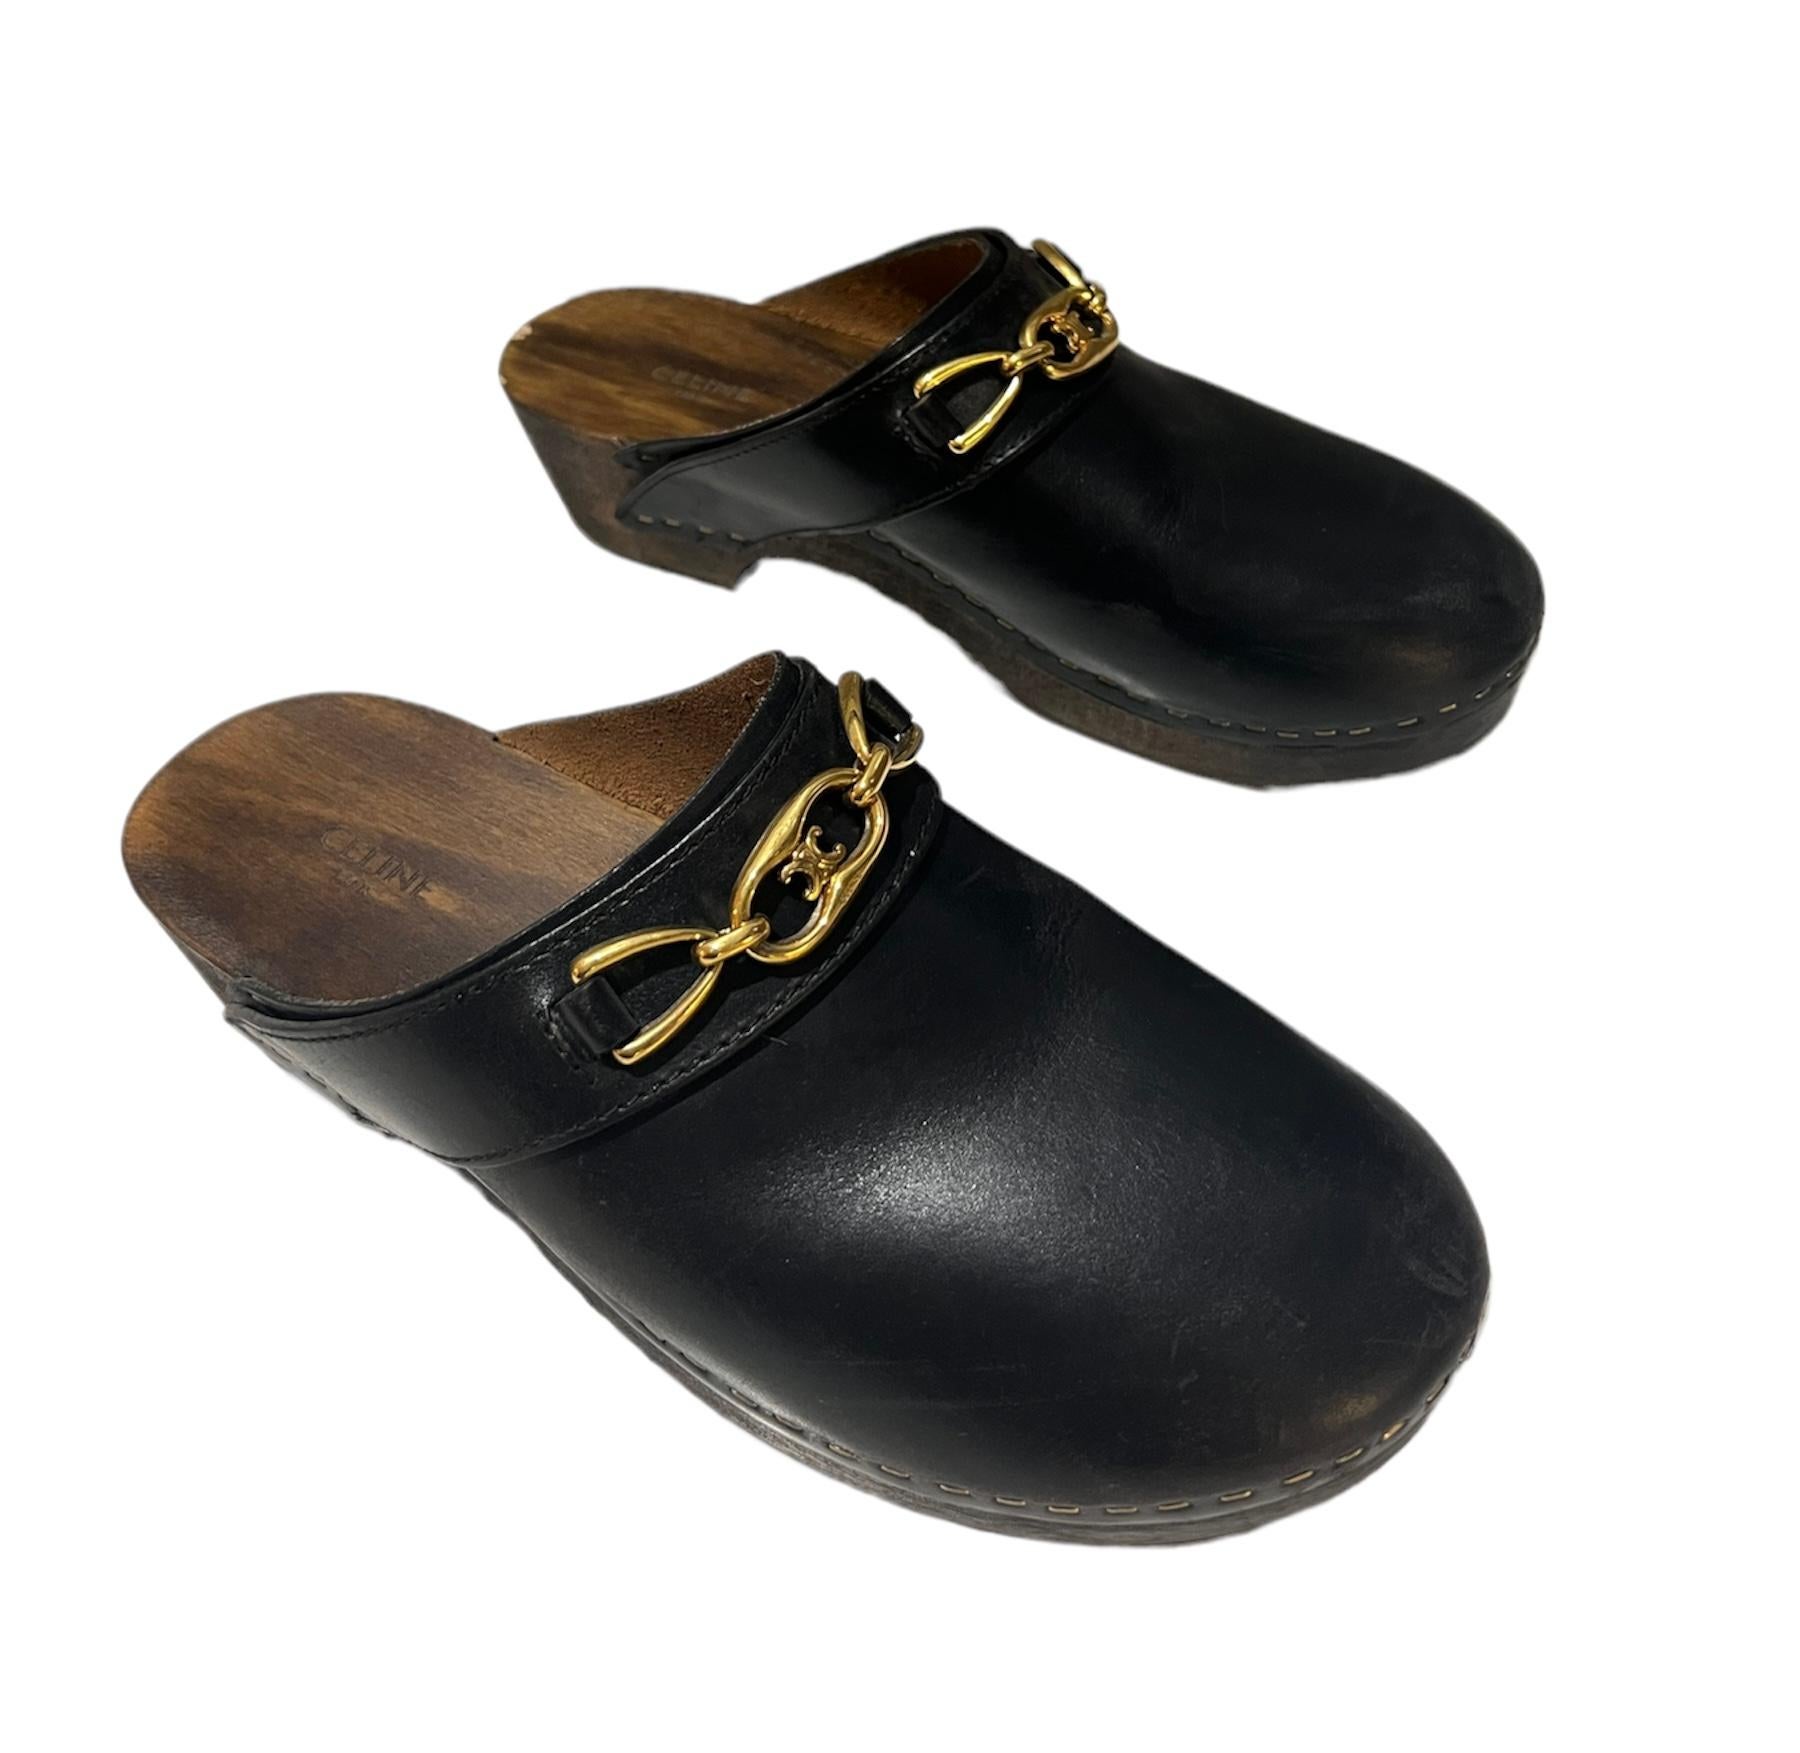 Celine Les Bois Black Leather Clogs Mules Shoes, Size 40 In Good Condition For Sale In Beverly Hills, CA